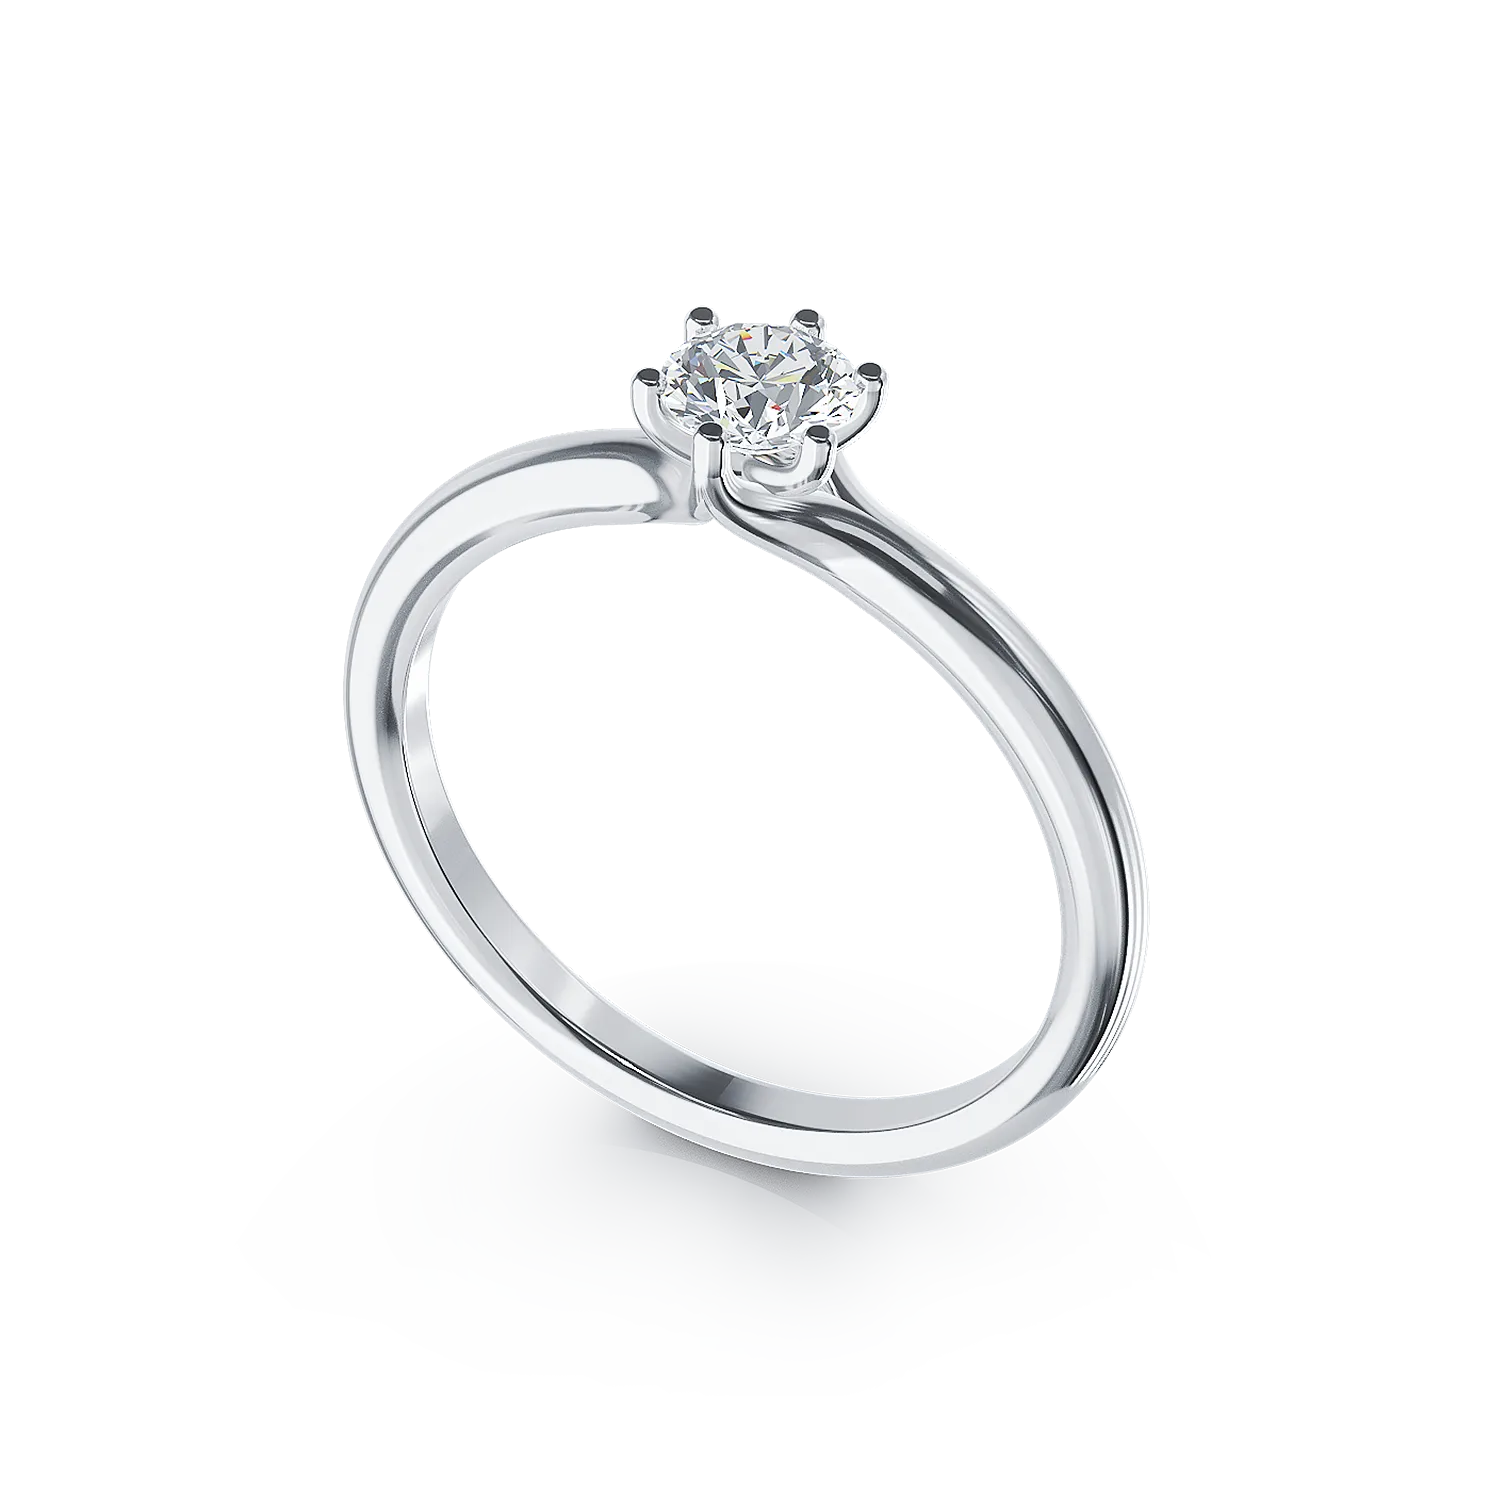 18K white gold engagement ring with 0.305ct diamond